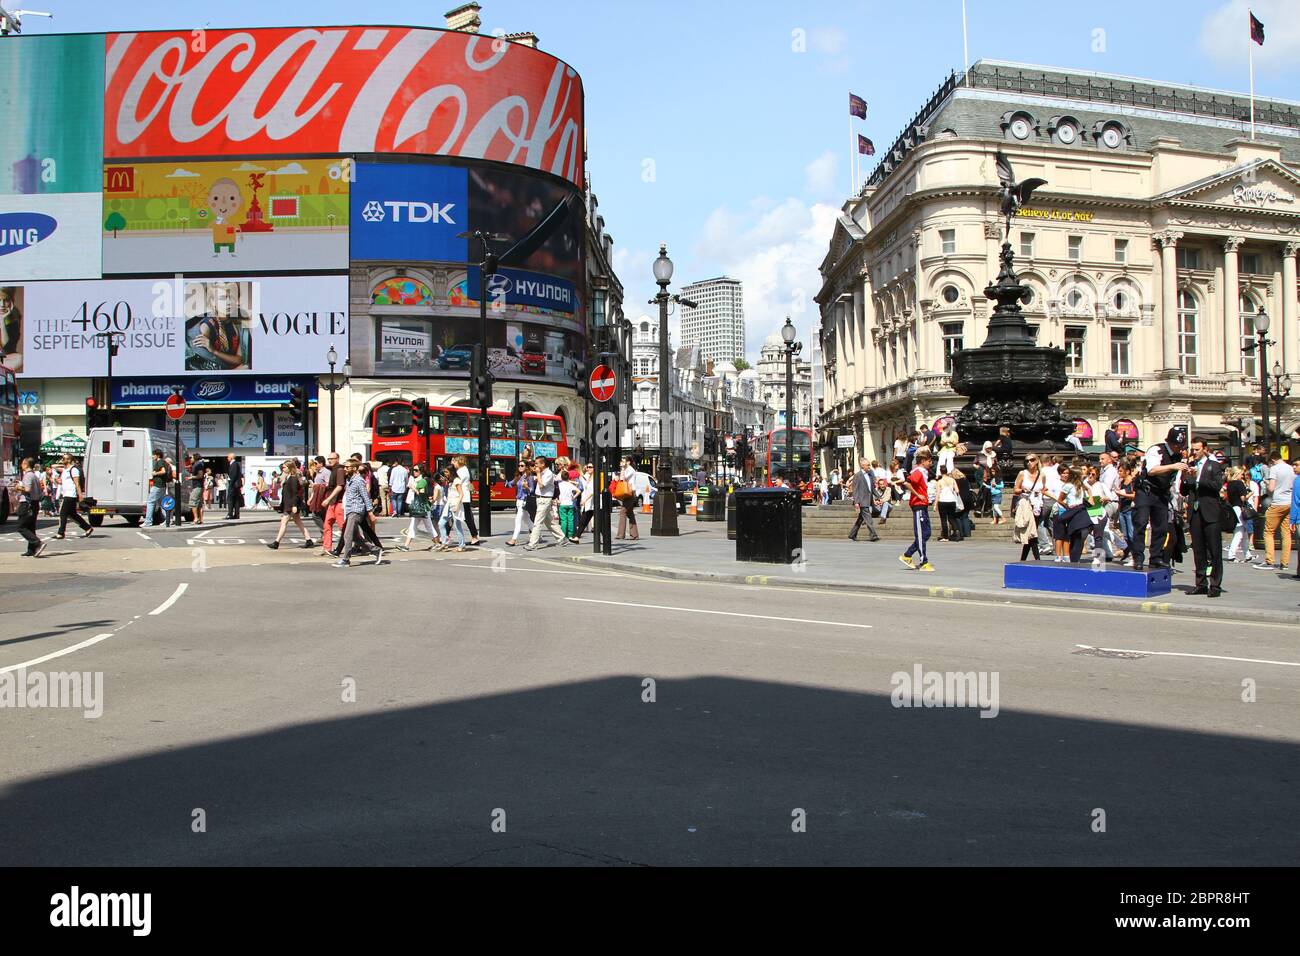 WIDE ANGLE VIEW OF PICADDILLY CIRCUS IN CENTRAL LONDON WITH THE STATUE OF EROS TO THE RIGHT , SHAFTSBURY AVENUE BETWEEN THE TROCADERO AND THE ADVETISING DISPLAY. NO TRAFFIC. COMPANIES ADVERTISING ARE COCA COLA, VOGUE MAGAZINE, TDK, SAMSUNG AND HYUNDAI. Stock Photo